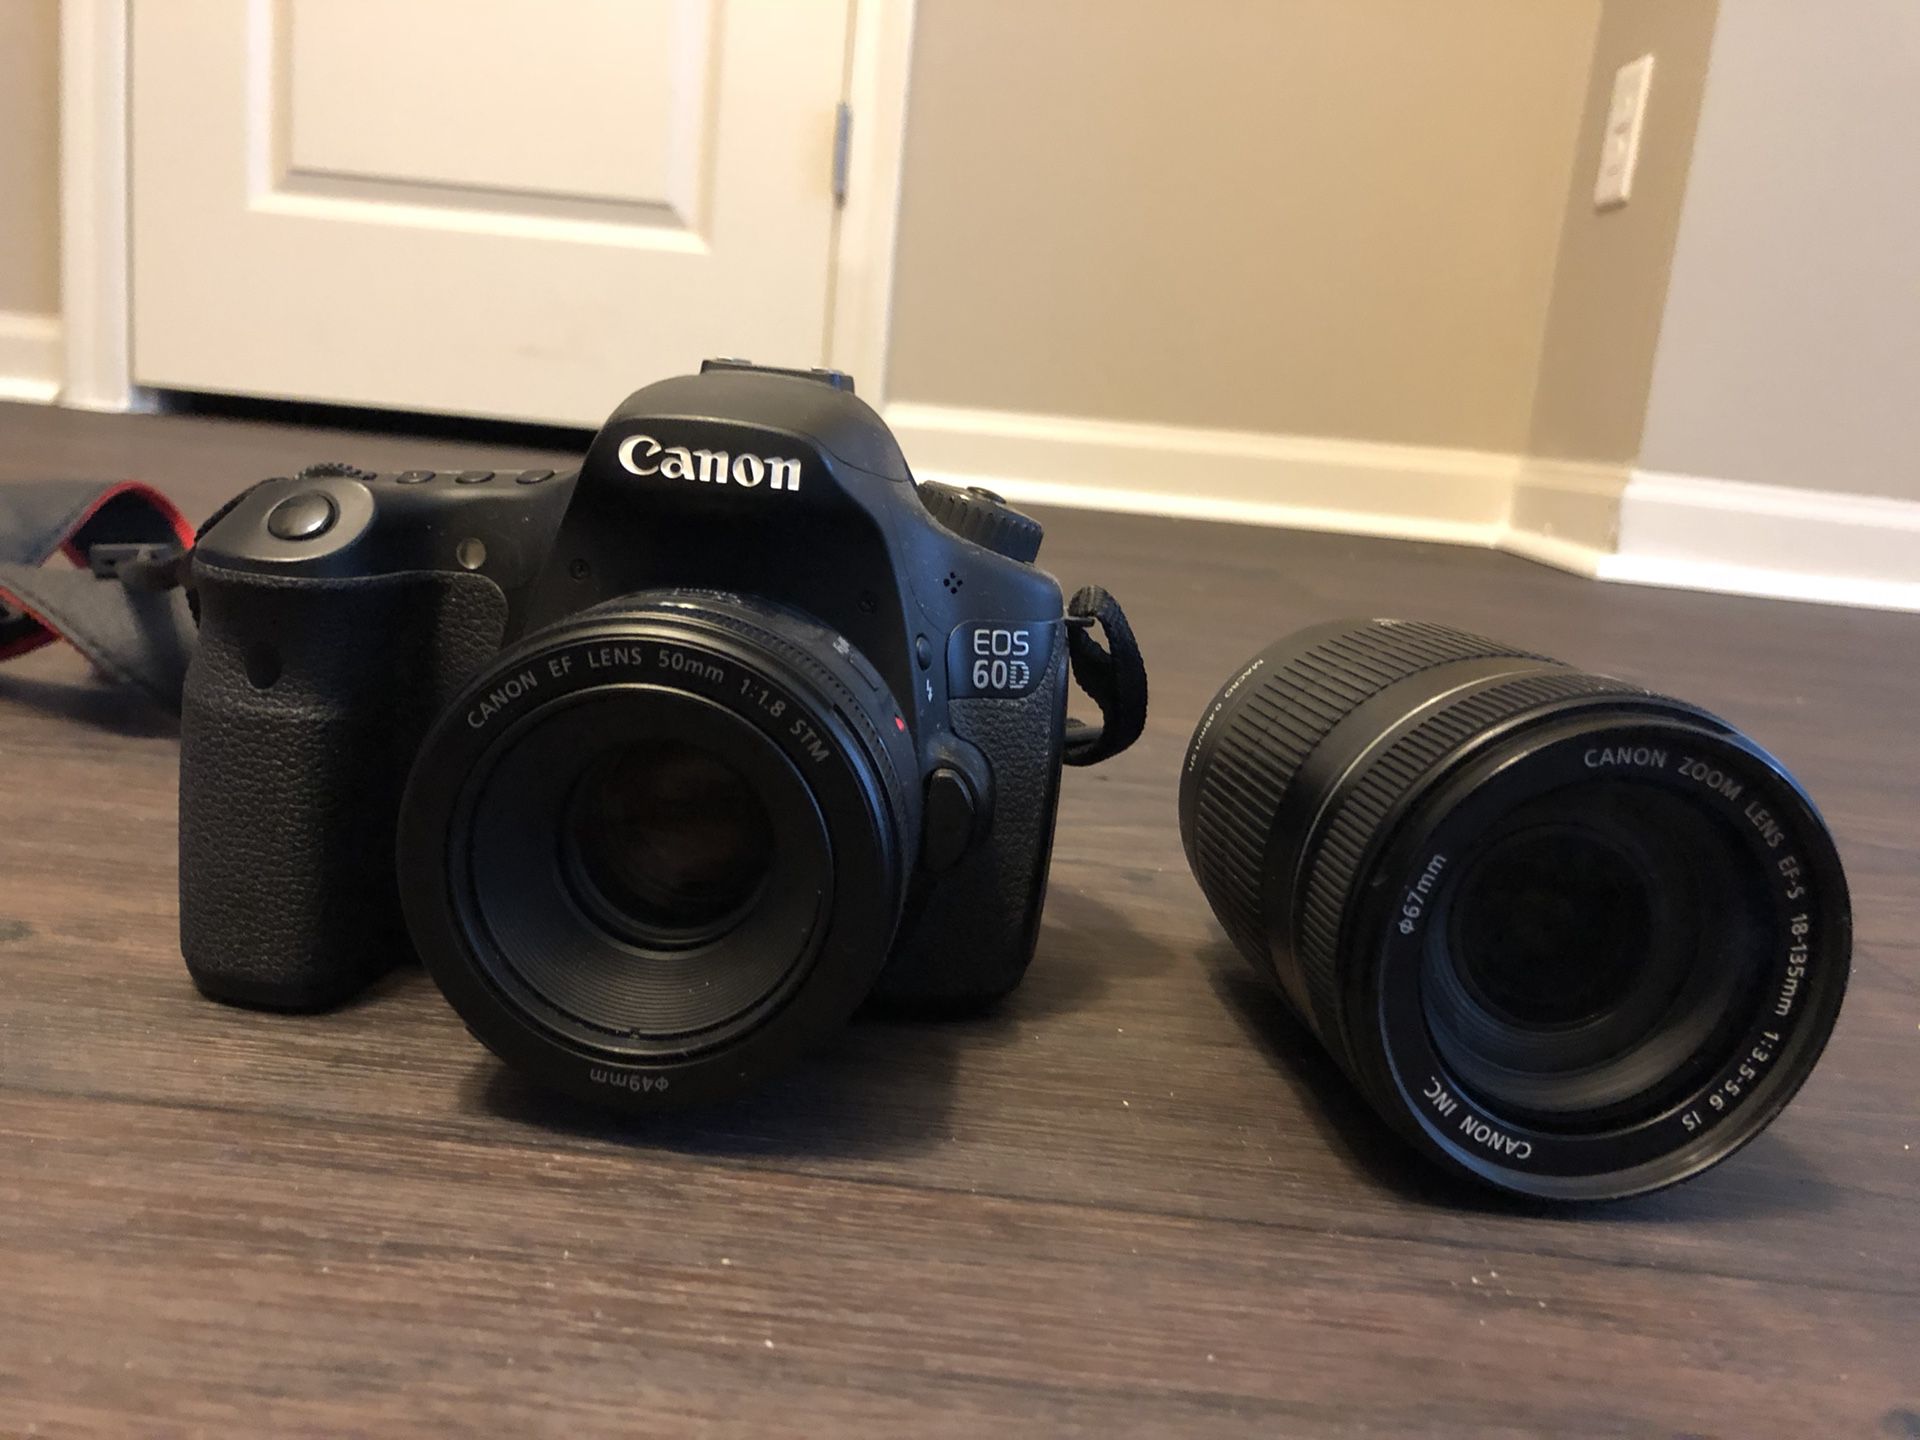 Canon 60d with 50 mm lens and kit zoom lens